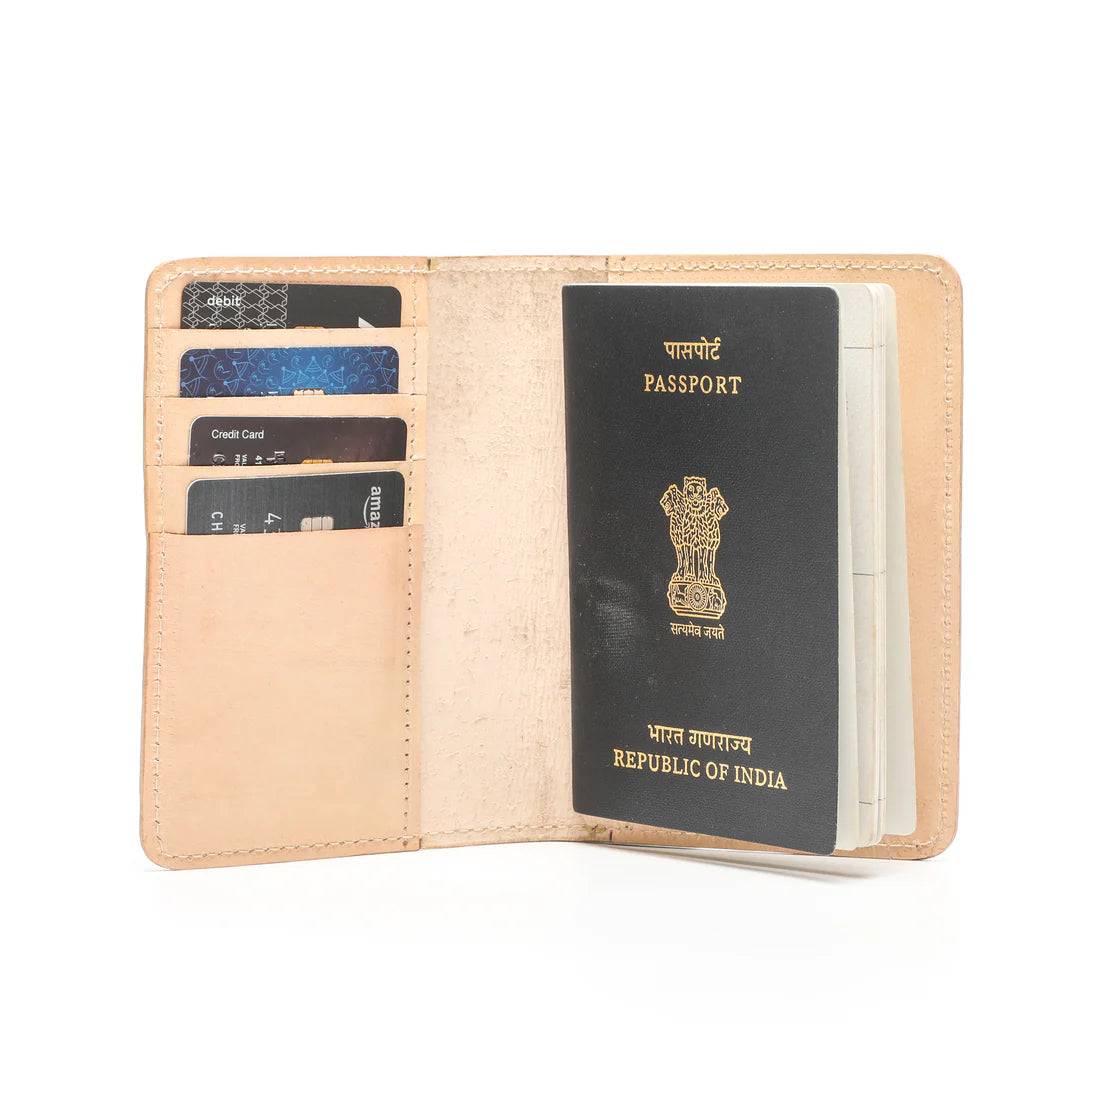 Inside of passport cover with passport and wallet to demonstrate how will it look.